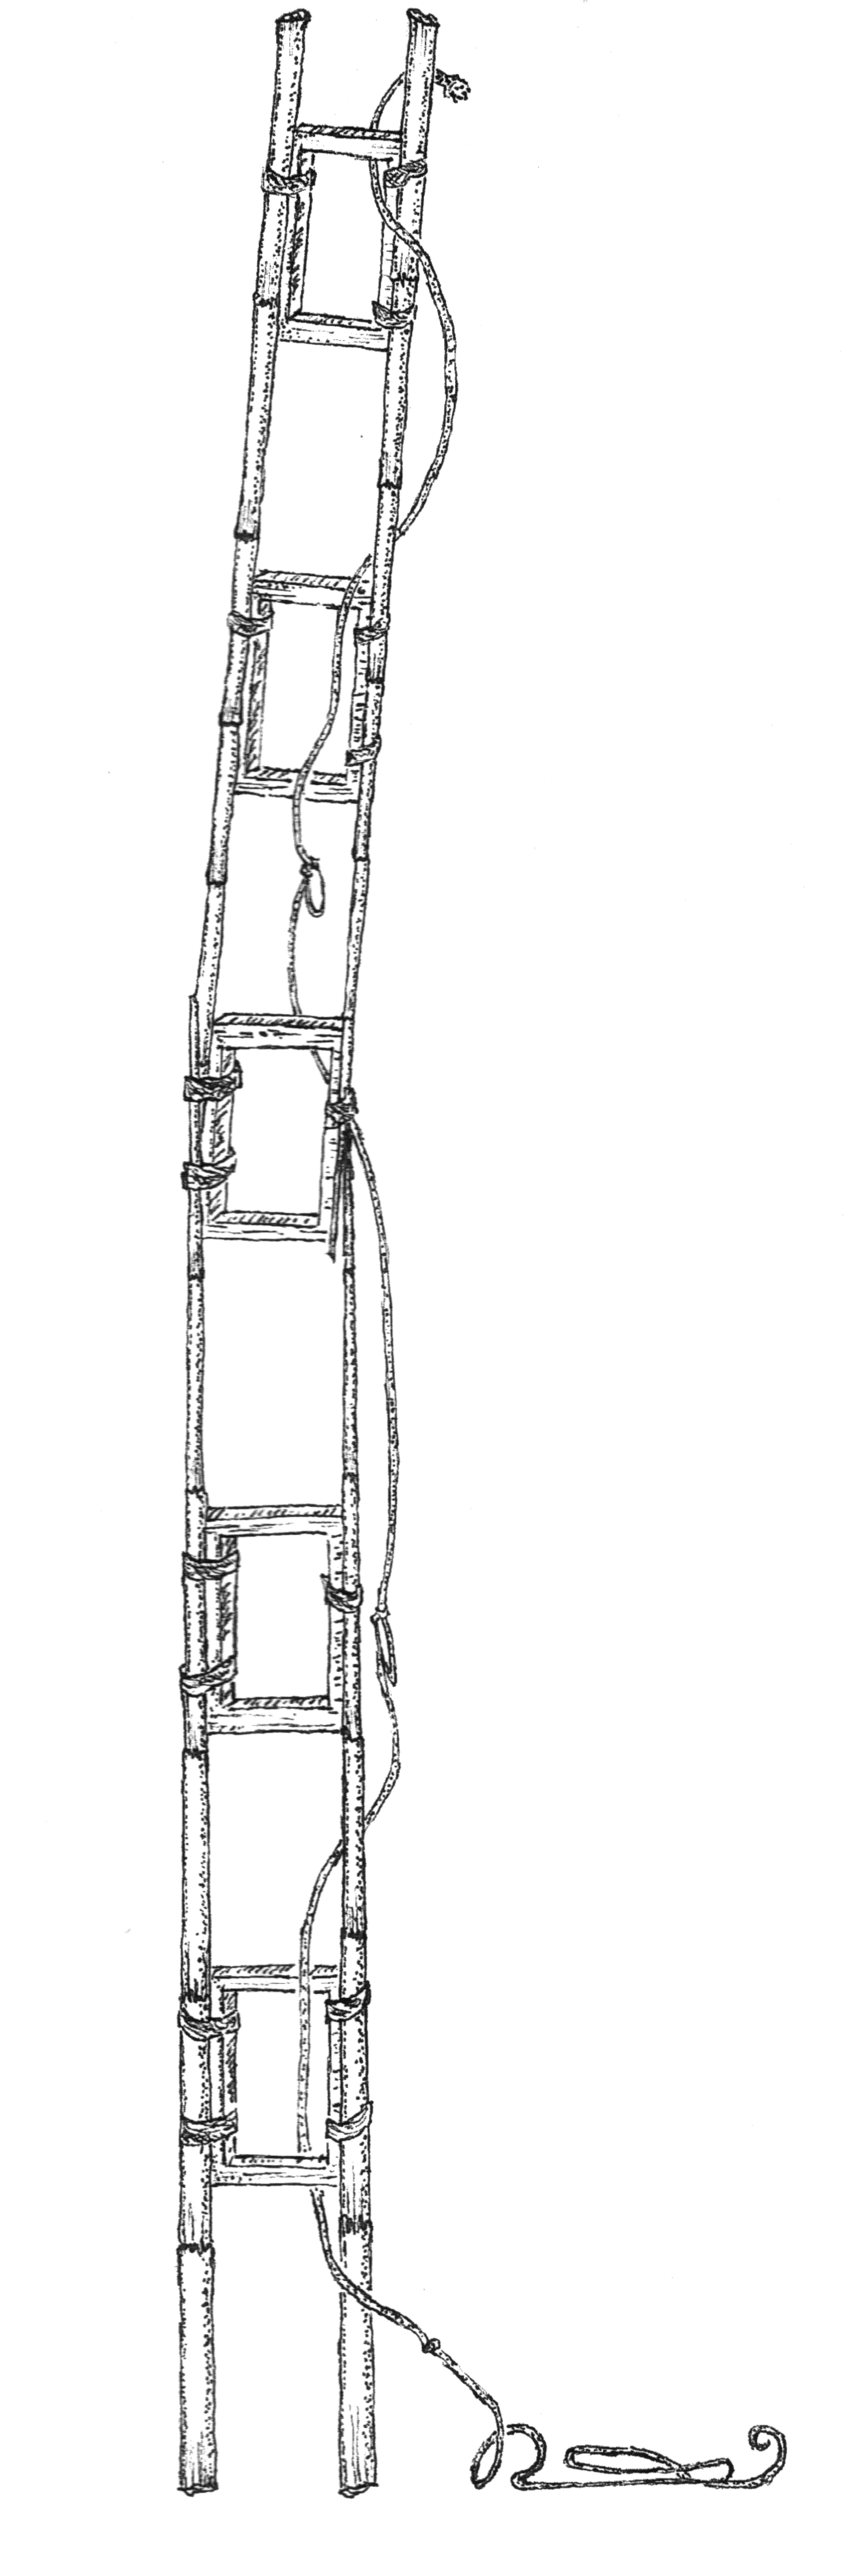 Design for the bamboo ladder McMillan used.